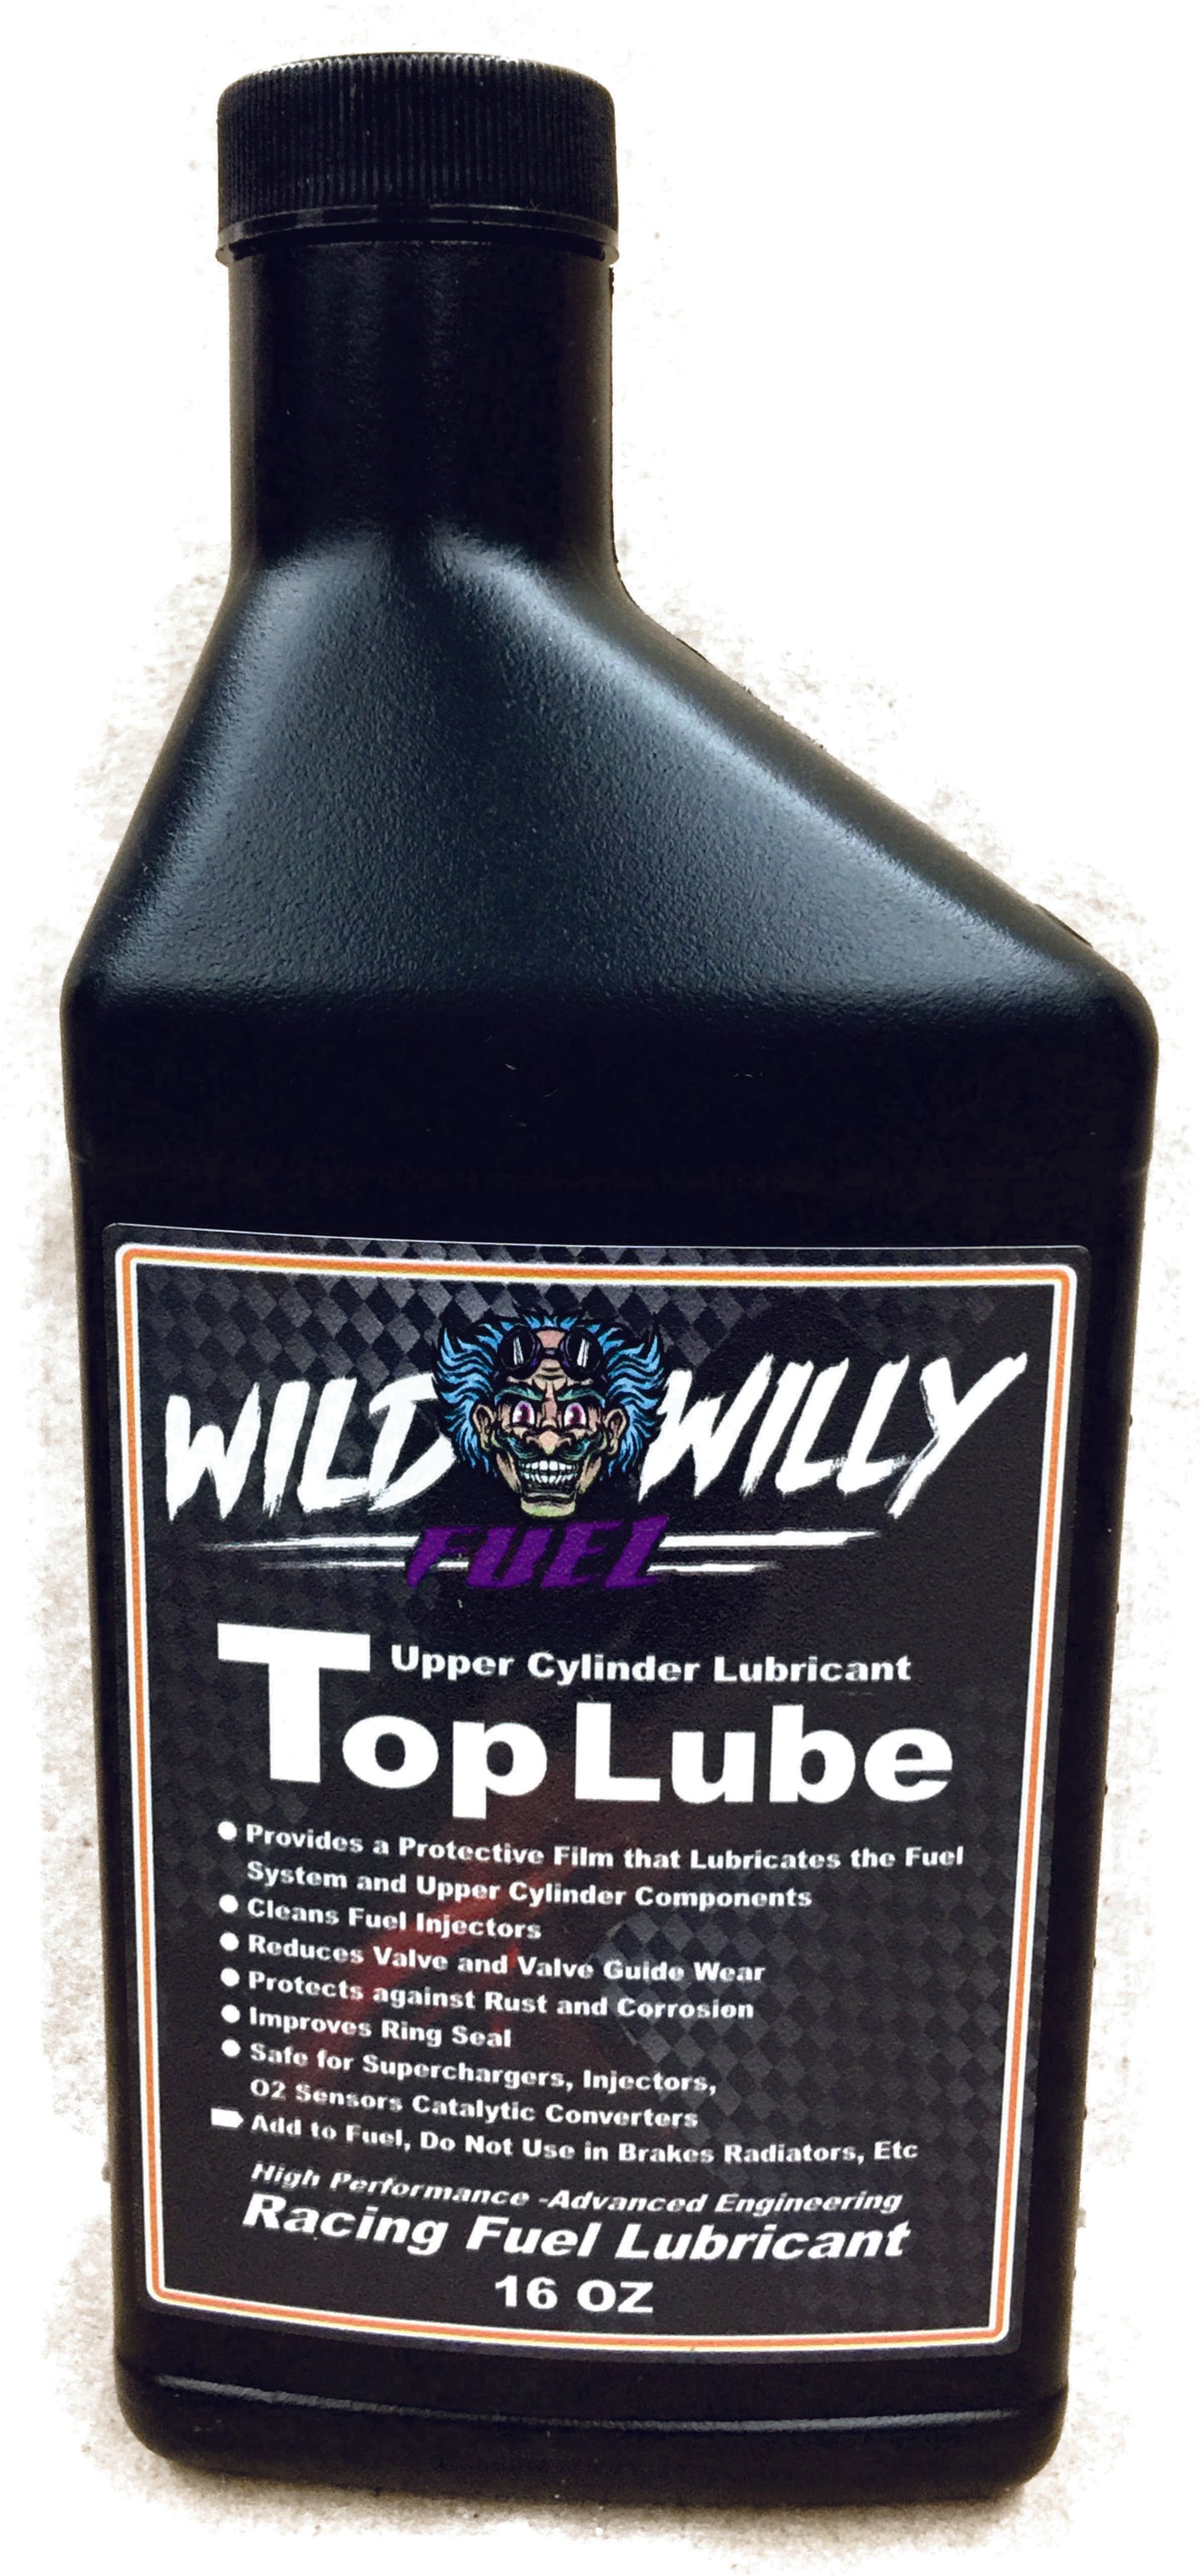 Top Lube